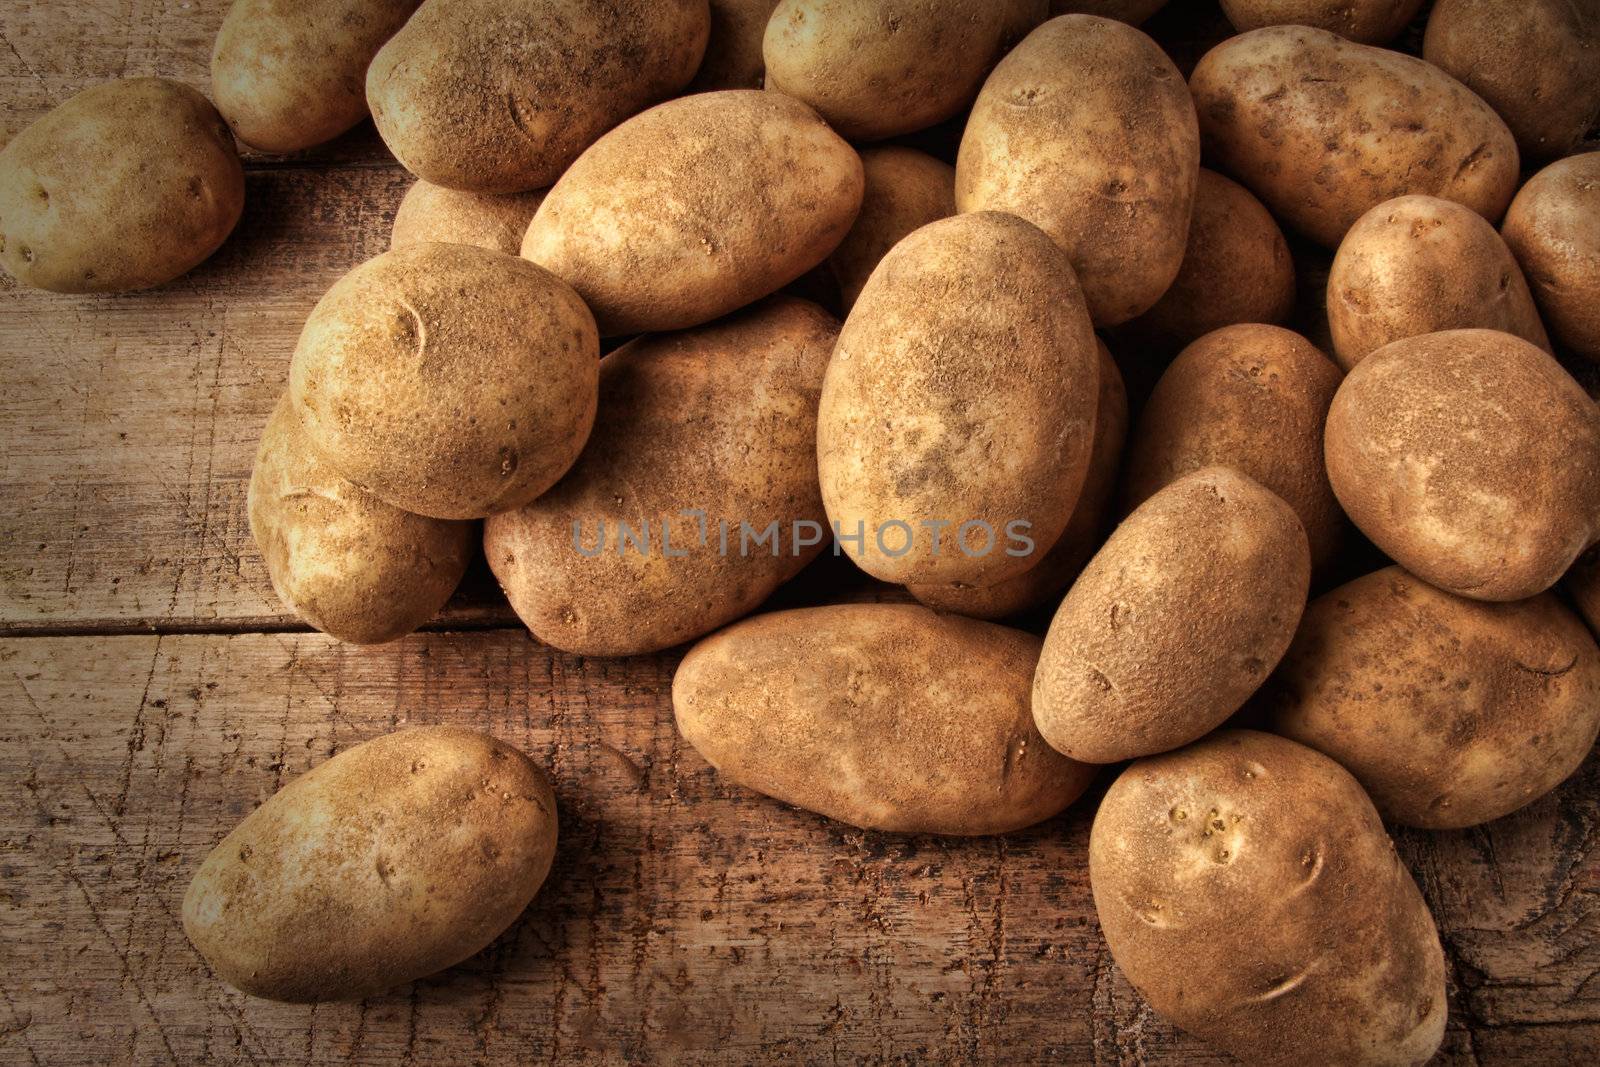 Fresh potatoes on wooden background  by Sandralise